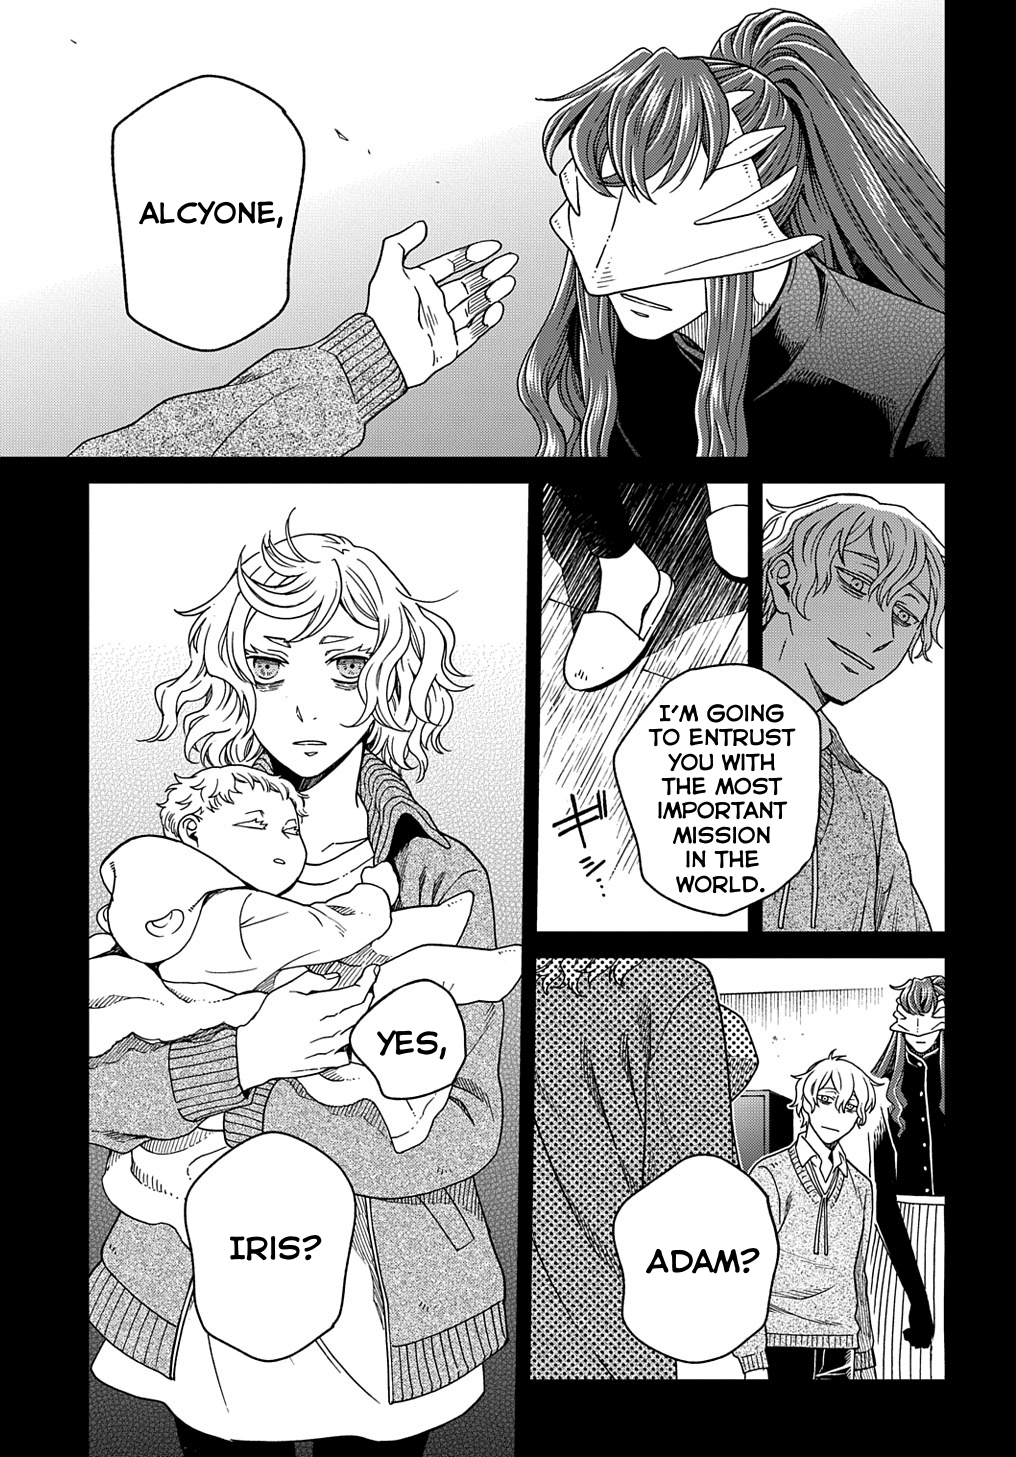 Mahoutsukai no Yome Vol.17-Chapter.83-Man's-Extremity-Is-God's-Opportunity.-II Image